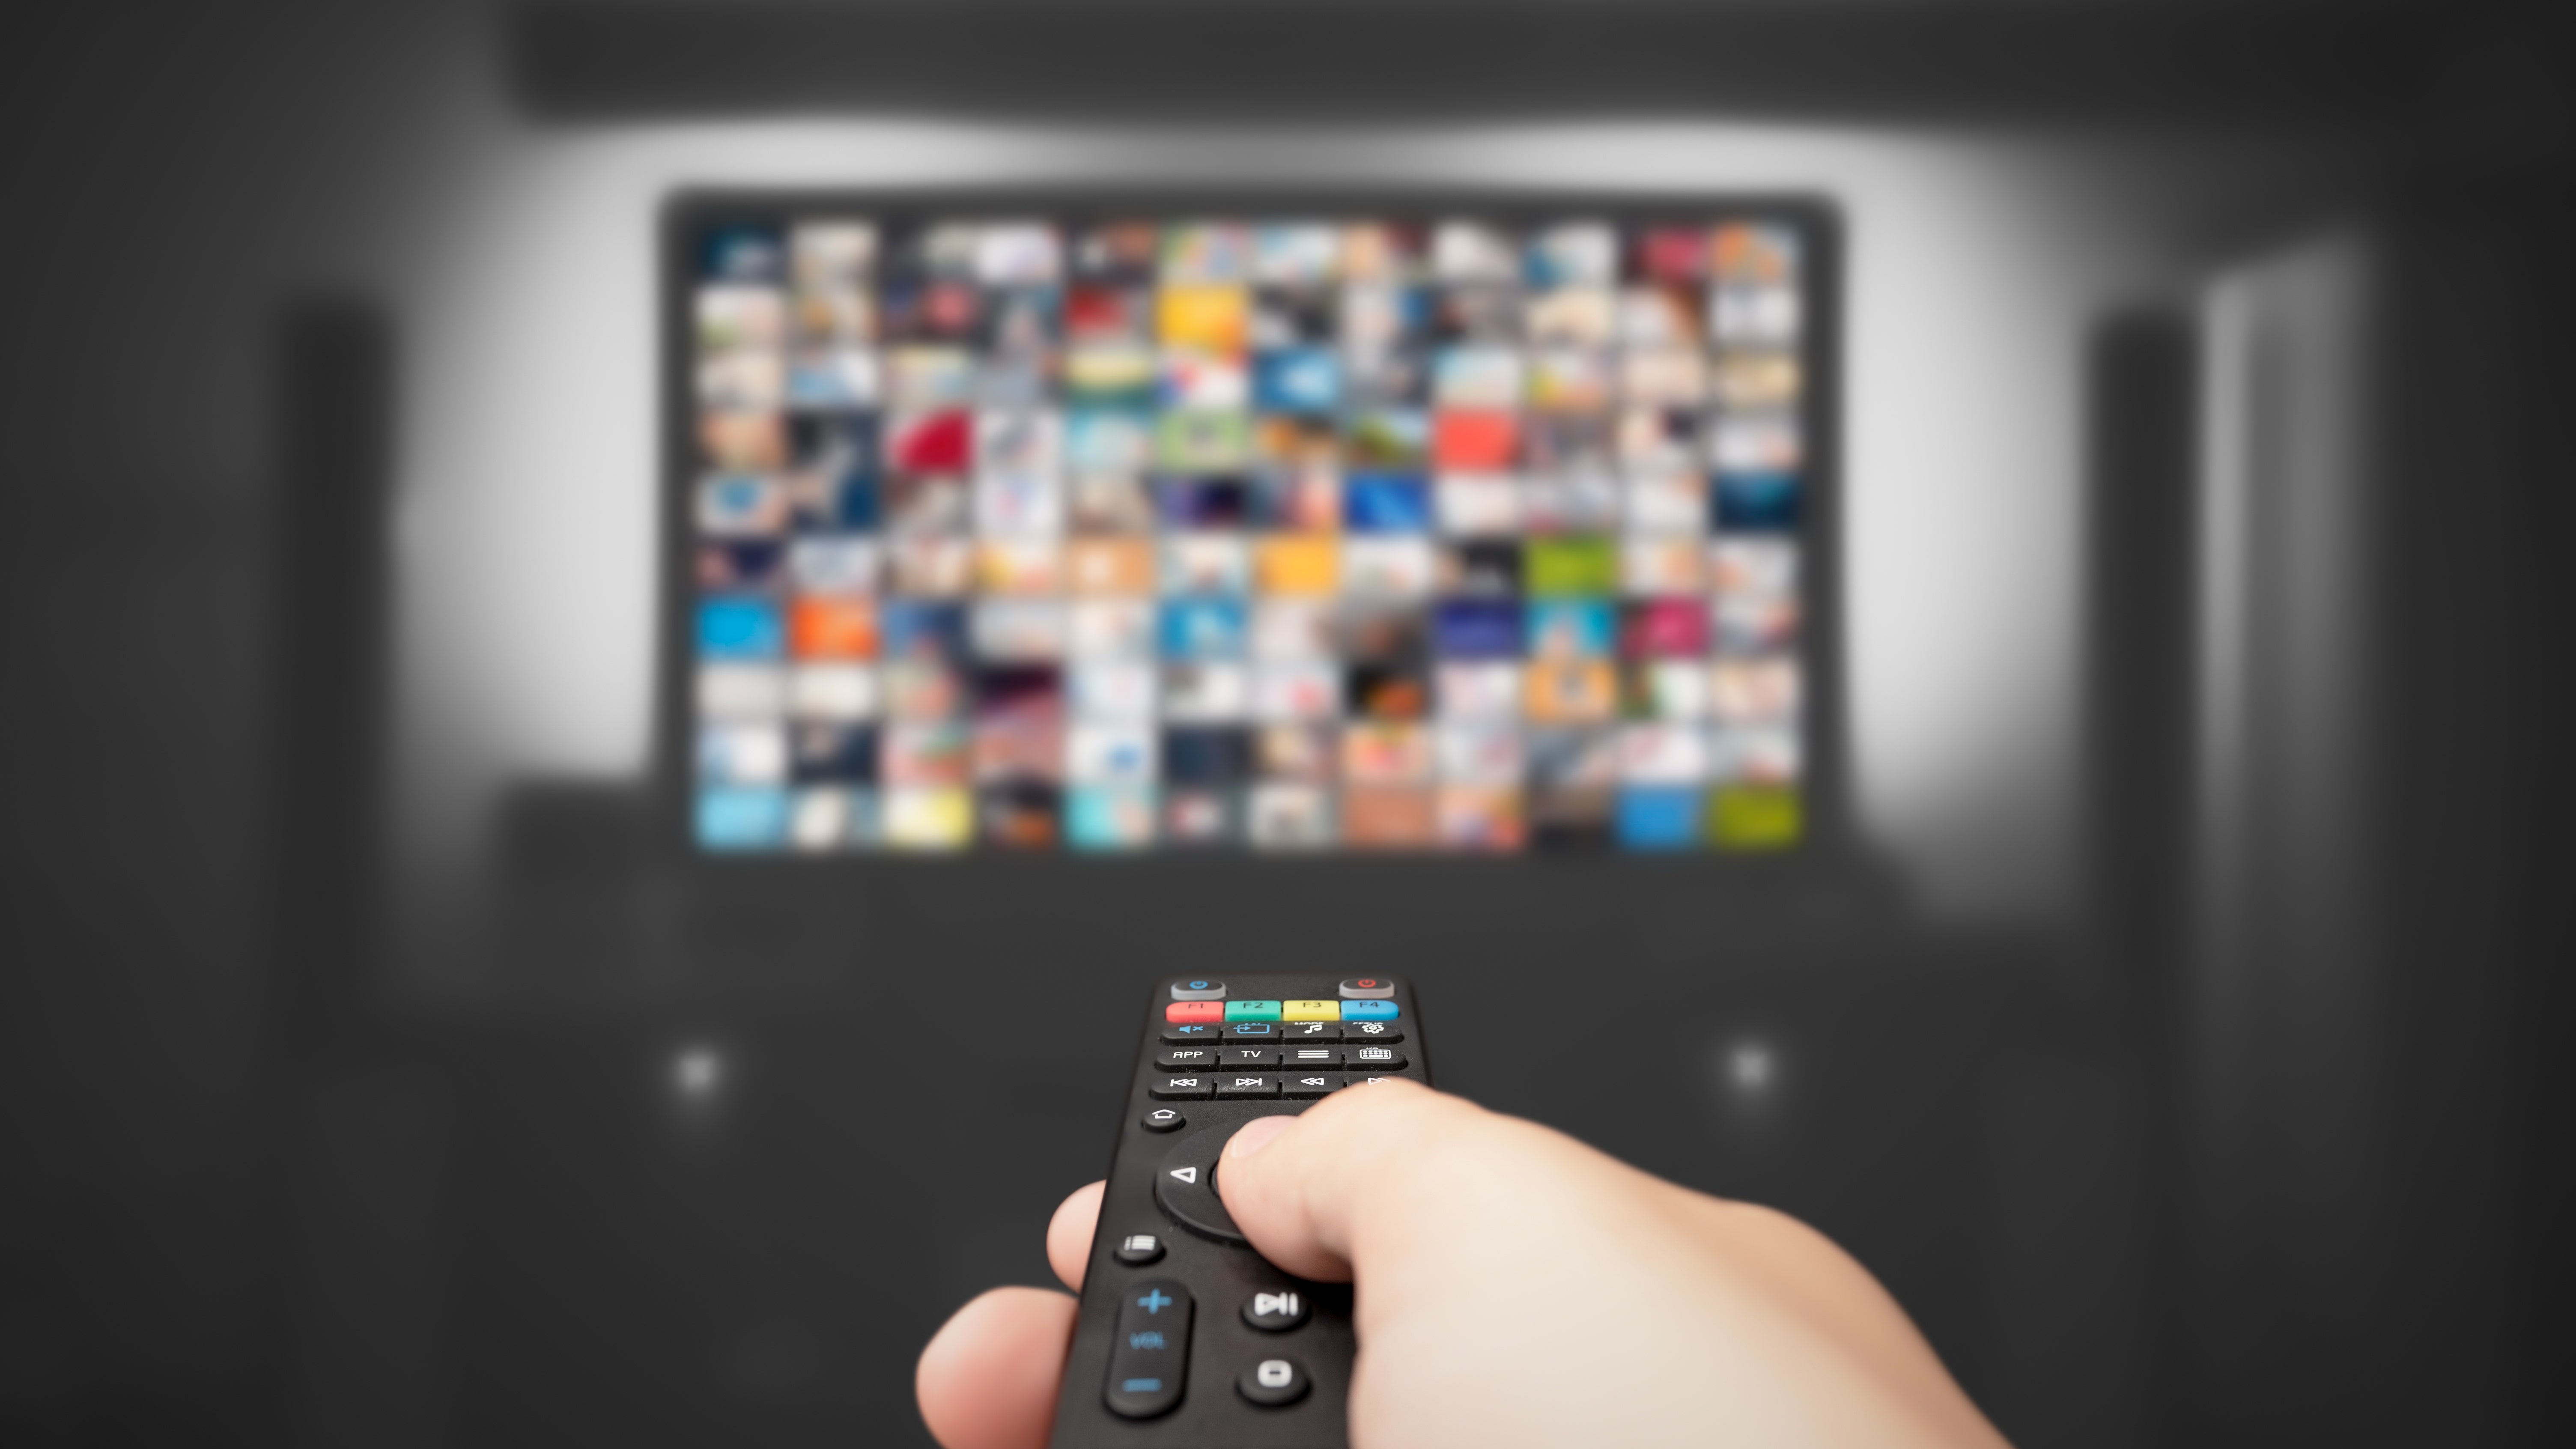 Netflix and other streaming giants pay to get branded buttons on your  remote control. Local TV services can't afford to keep up